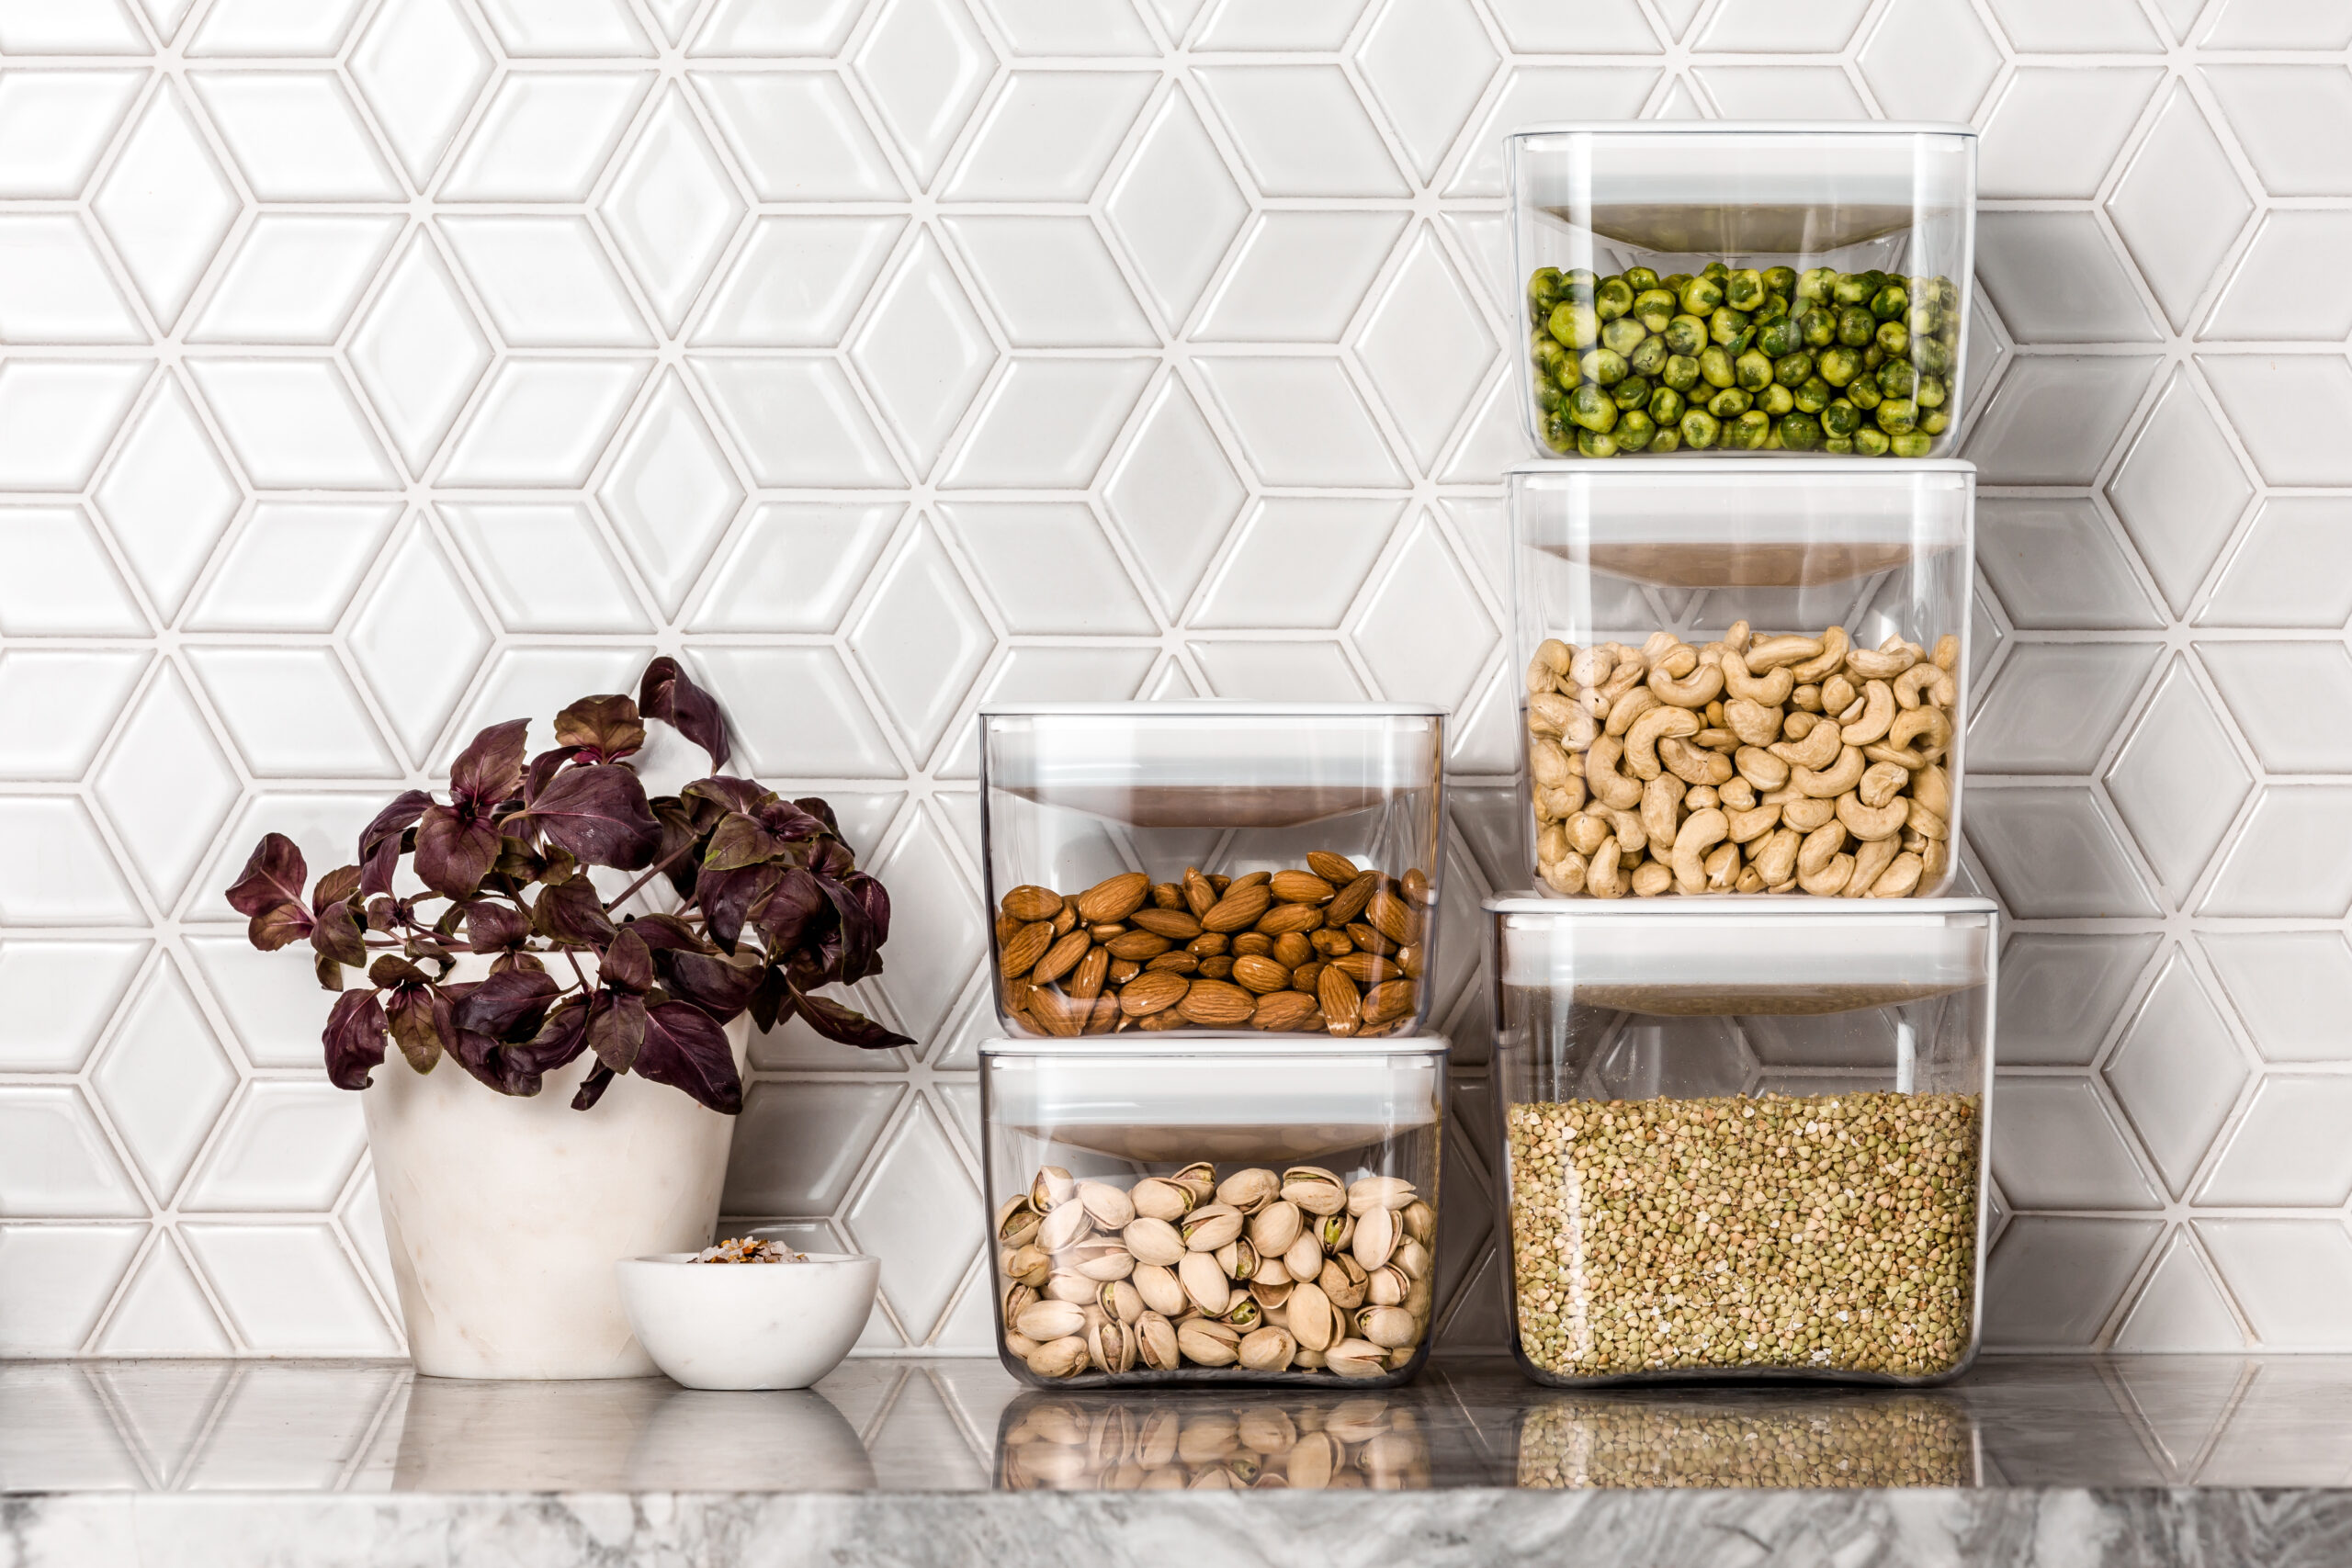 Pantry-cube-lifestyle-image-product-gallery.jpg